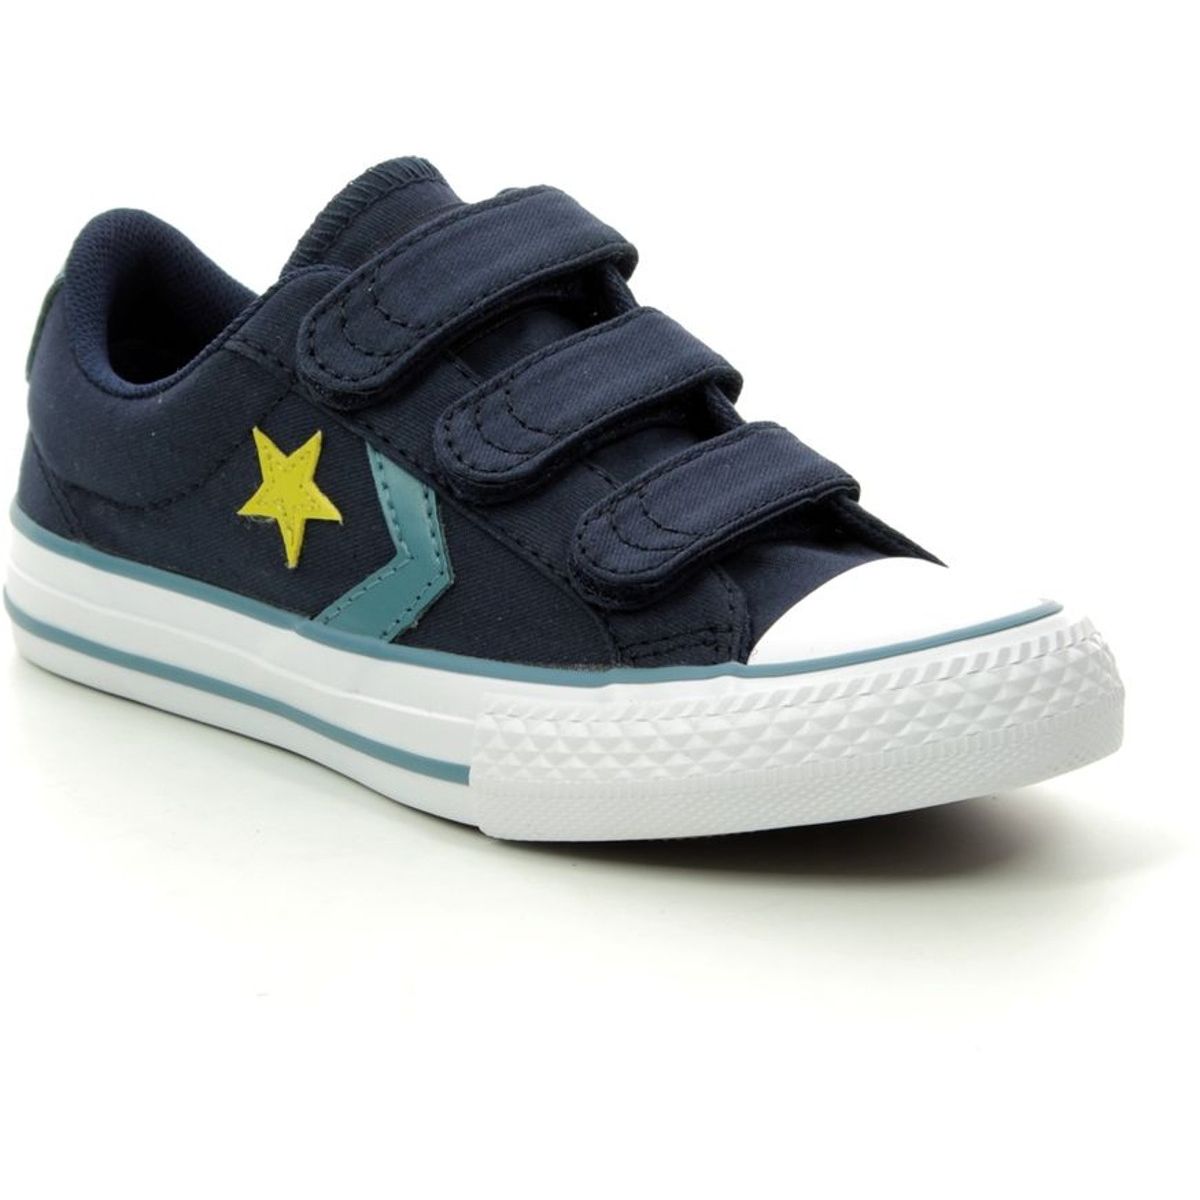 Converse Star Player 3V Canvas OX Junior Shoes 663600c